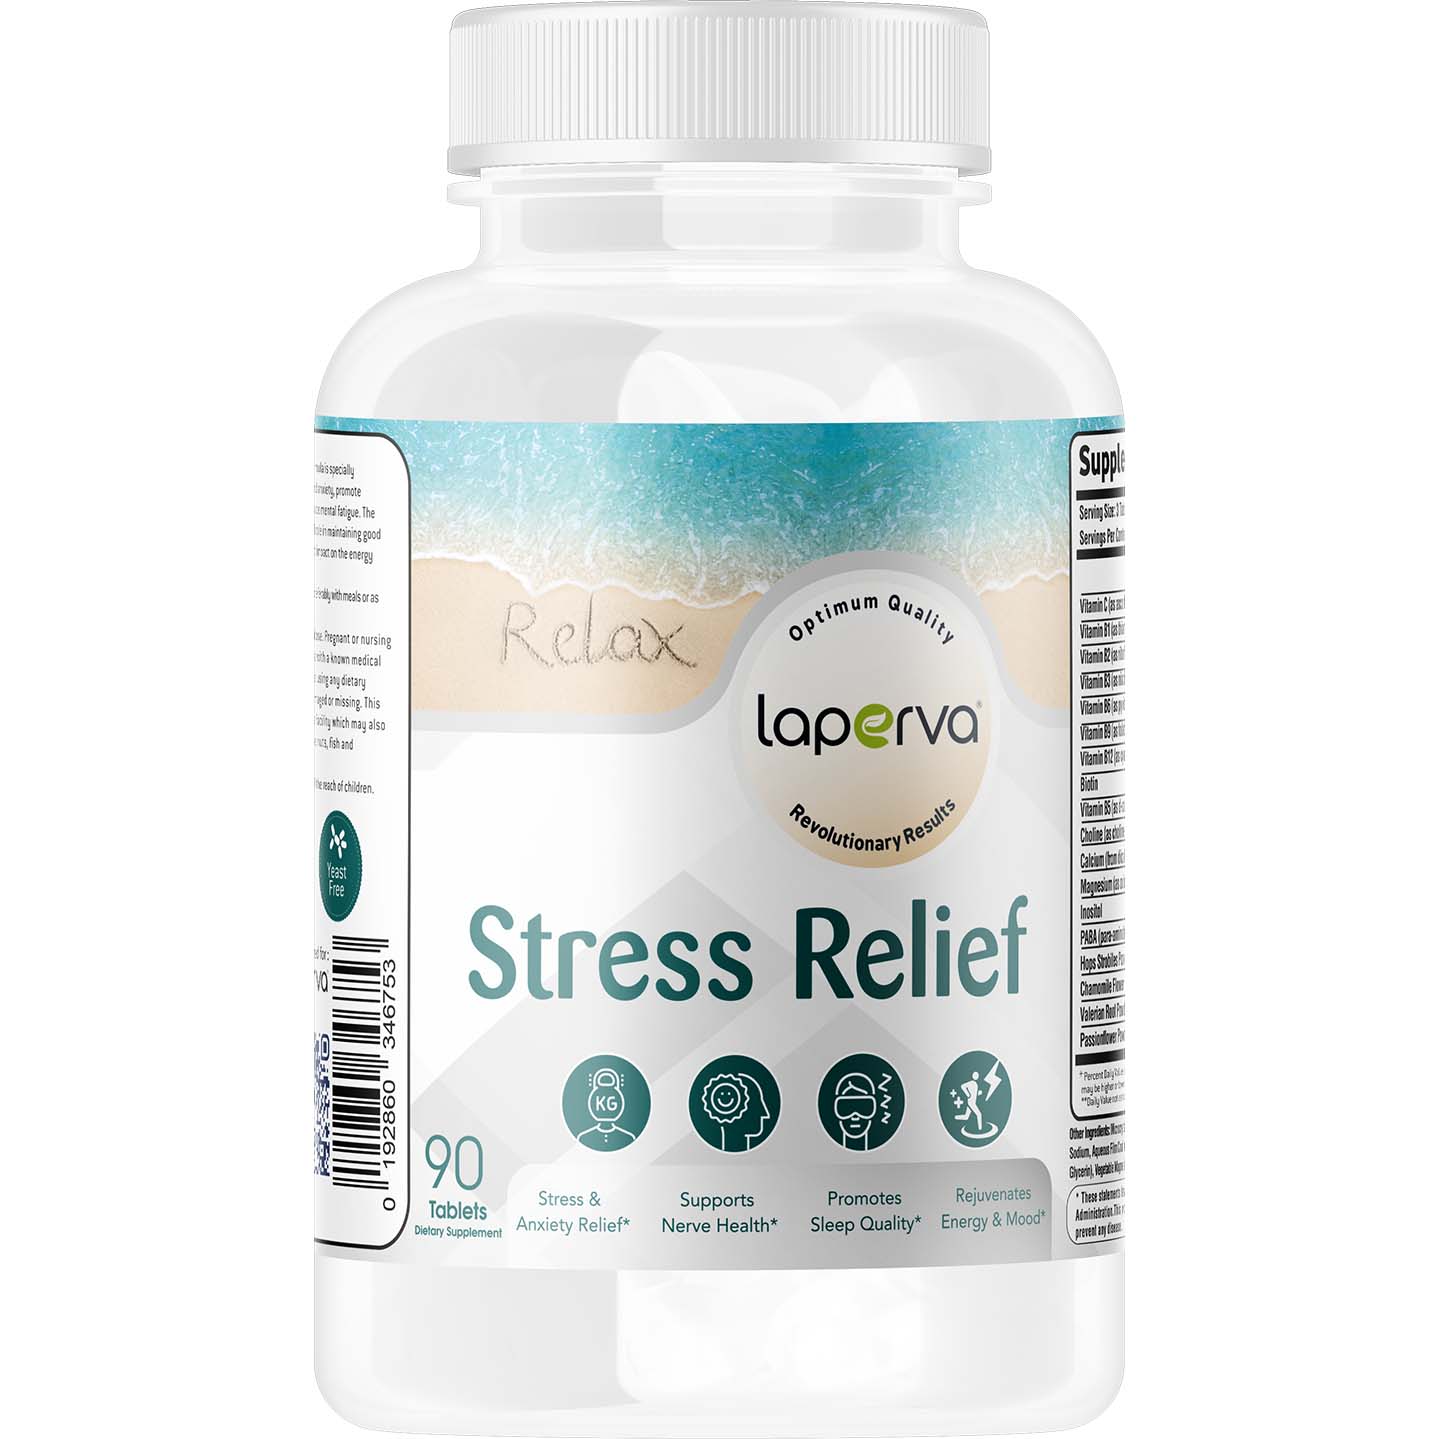 Laperva Stress Relief, 90 Tablets